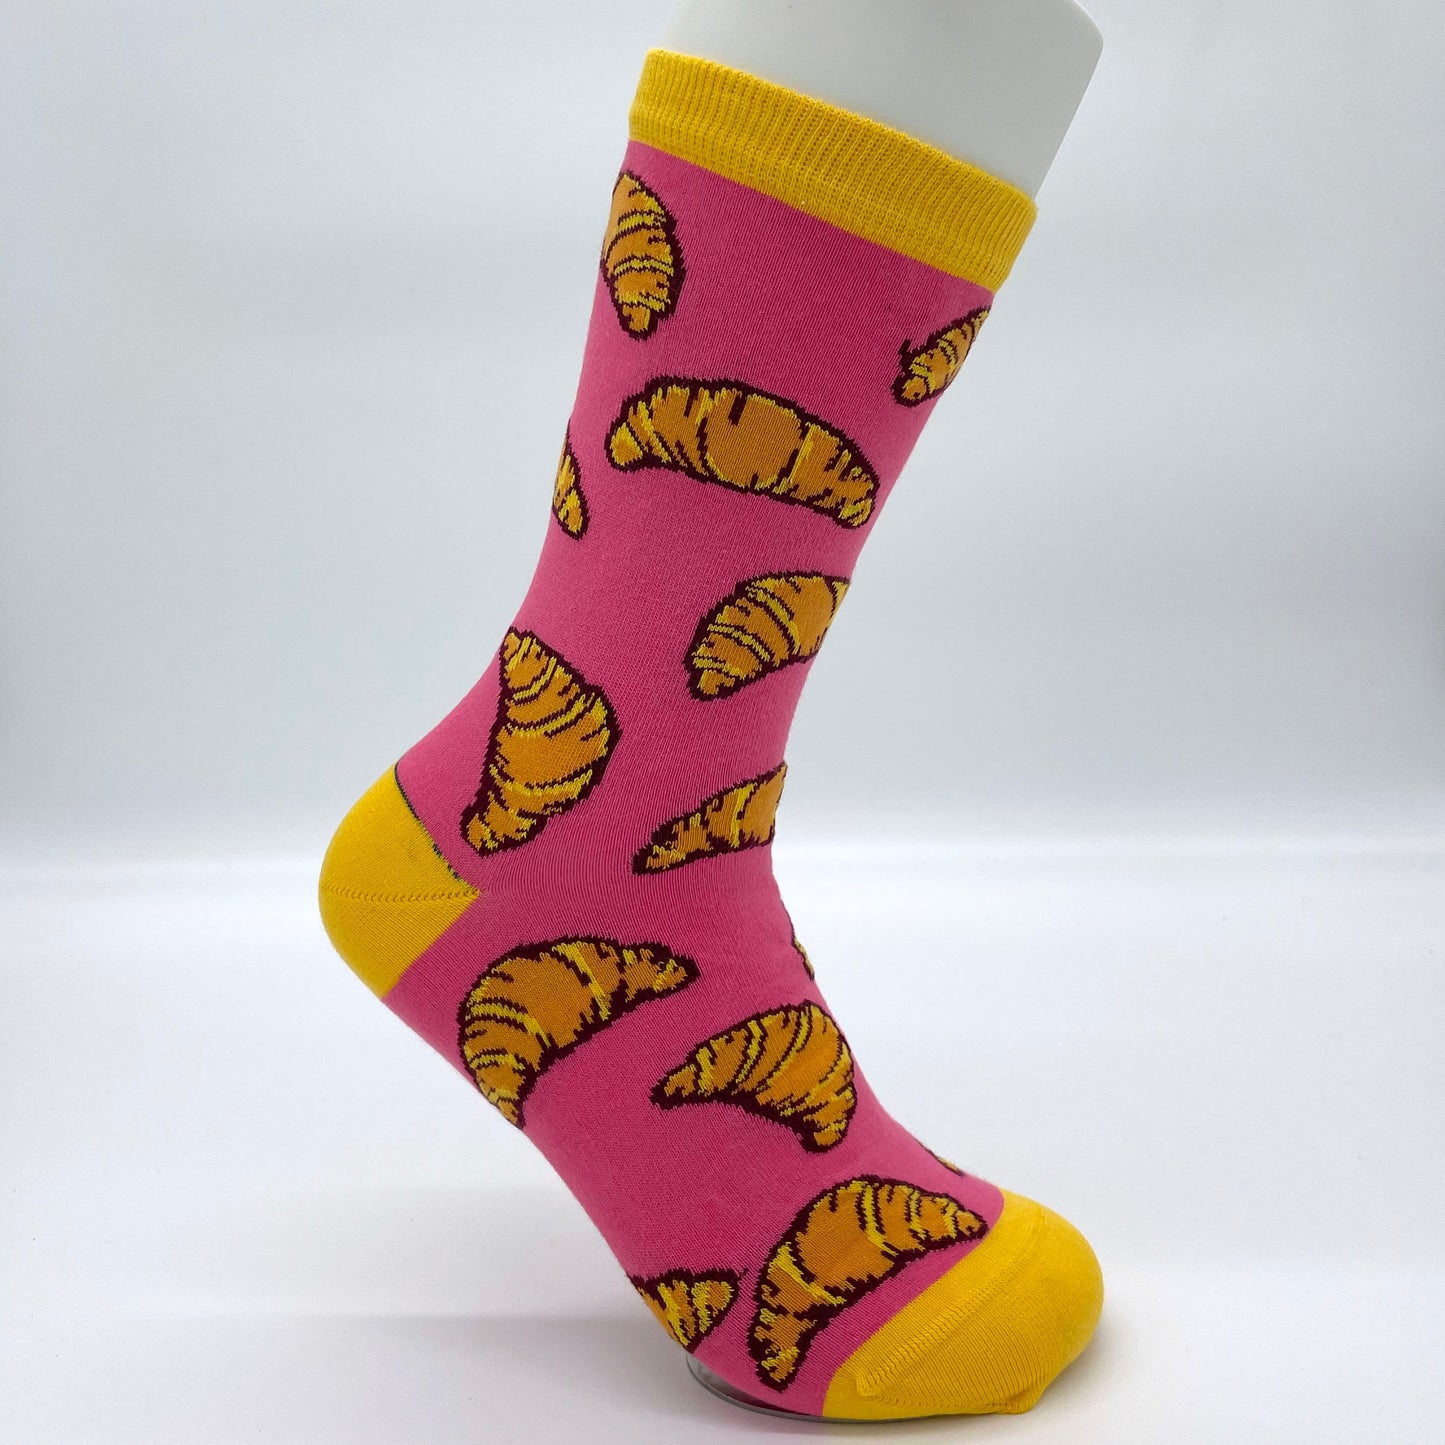 A white sock mannequin sports a pink sock patterned with croissants. The welt, heel and toe are yellow.